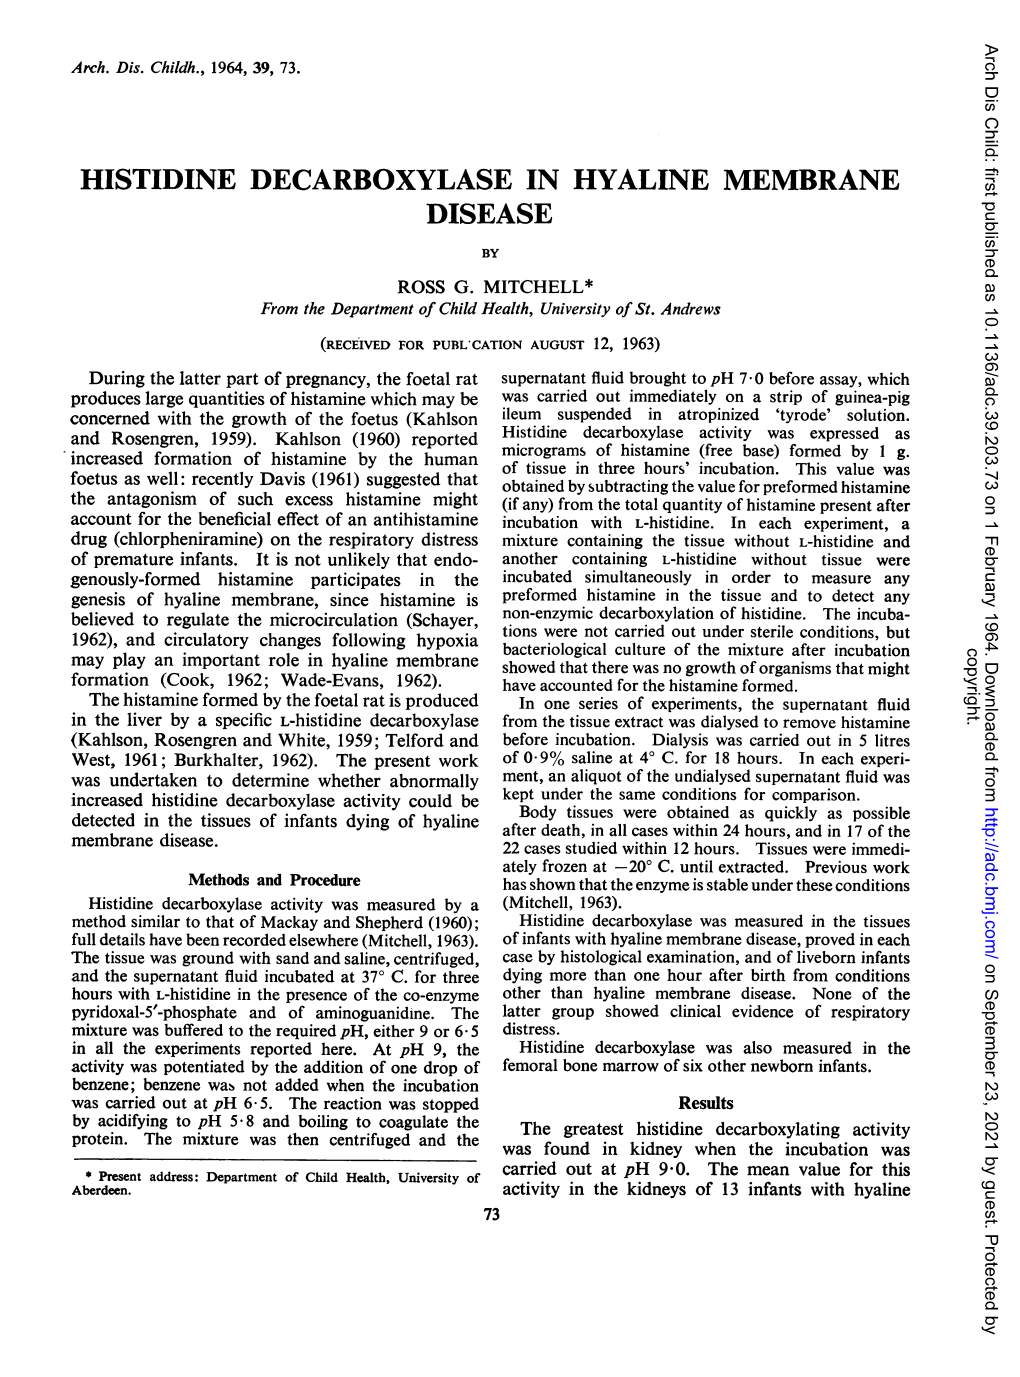 Histidine Decarboxylase in Hyaline Membrane Disease by Ross G